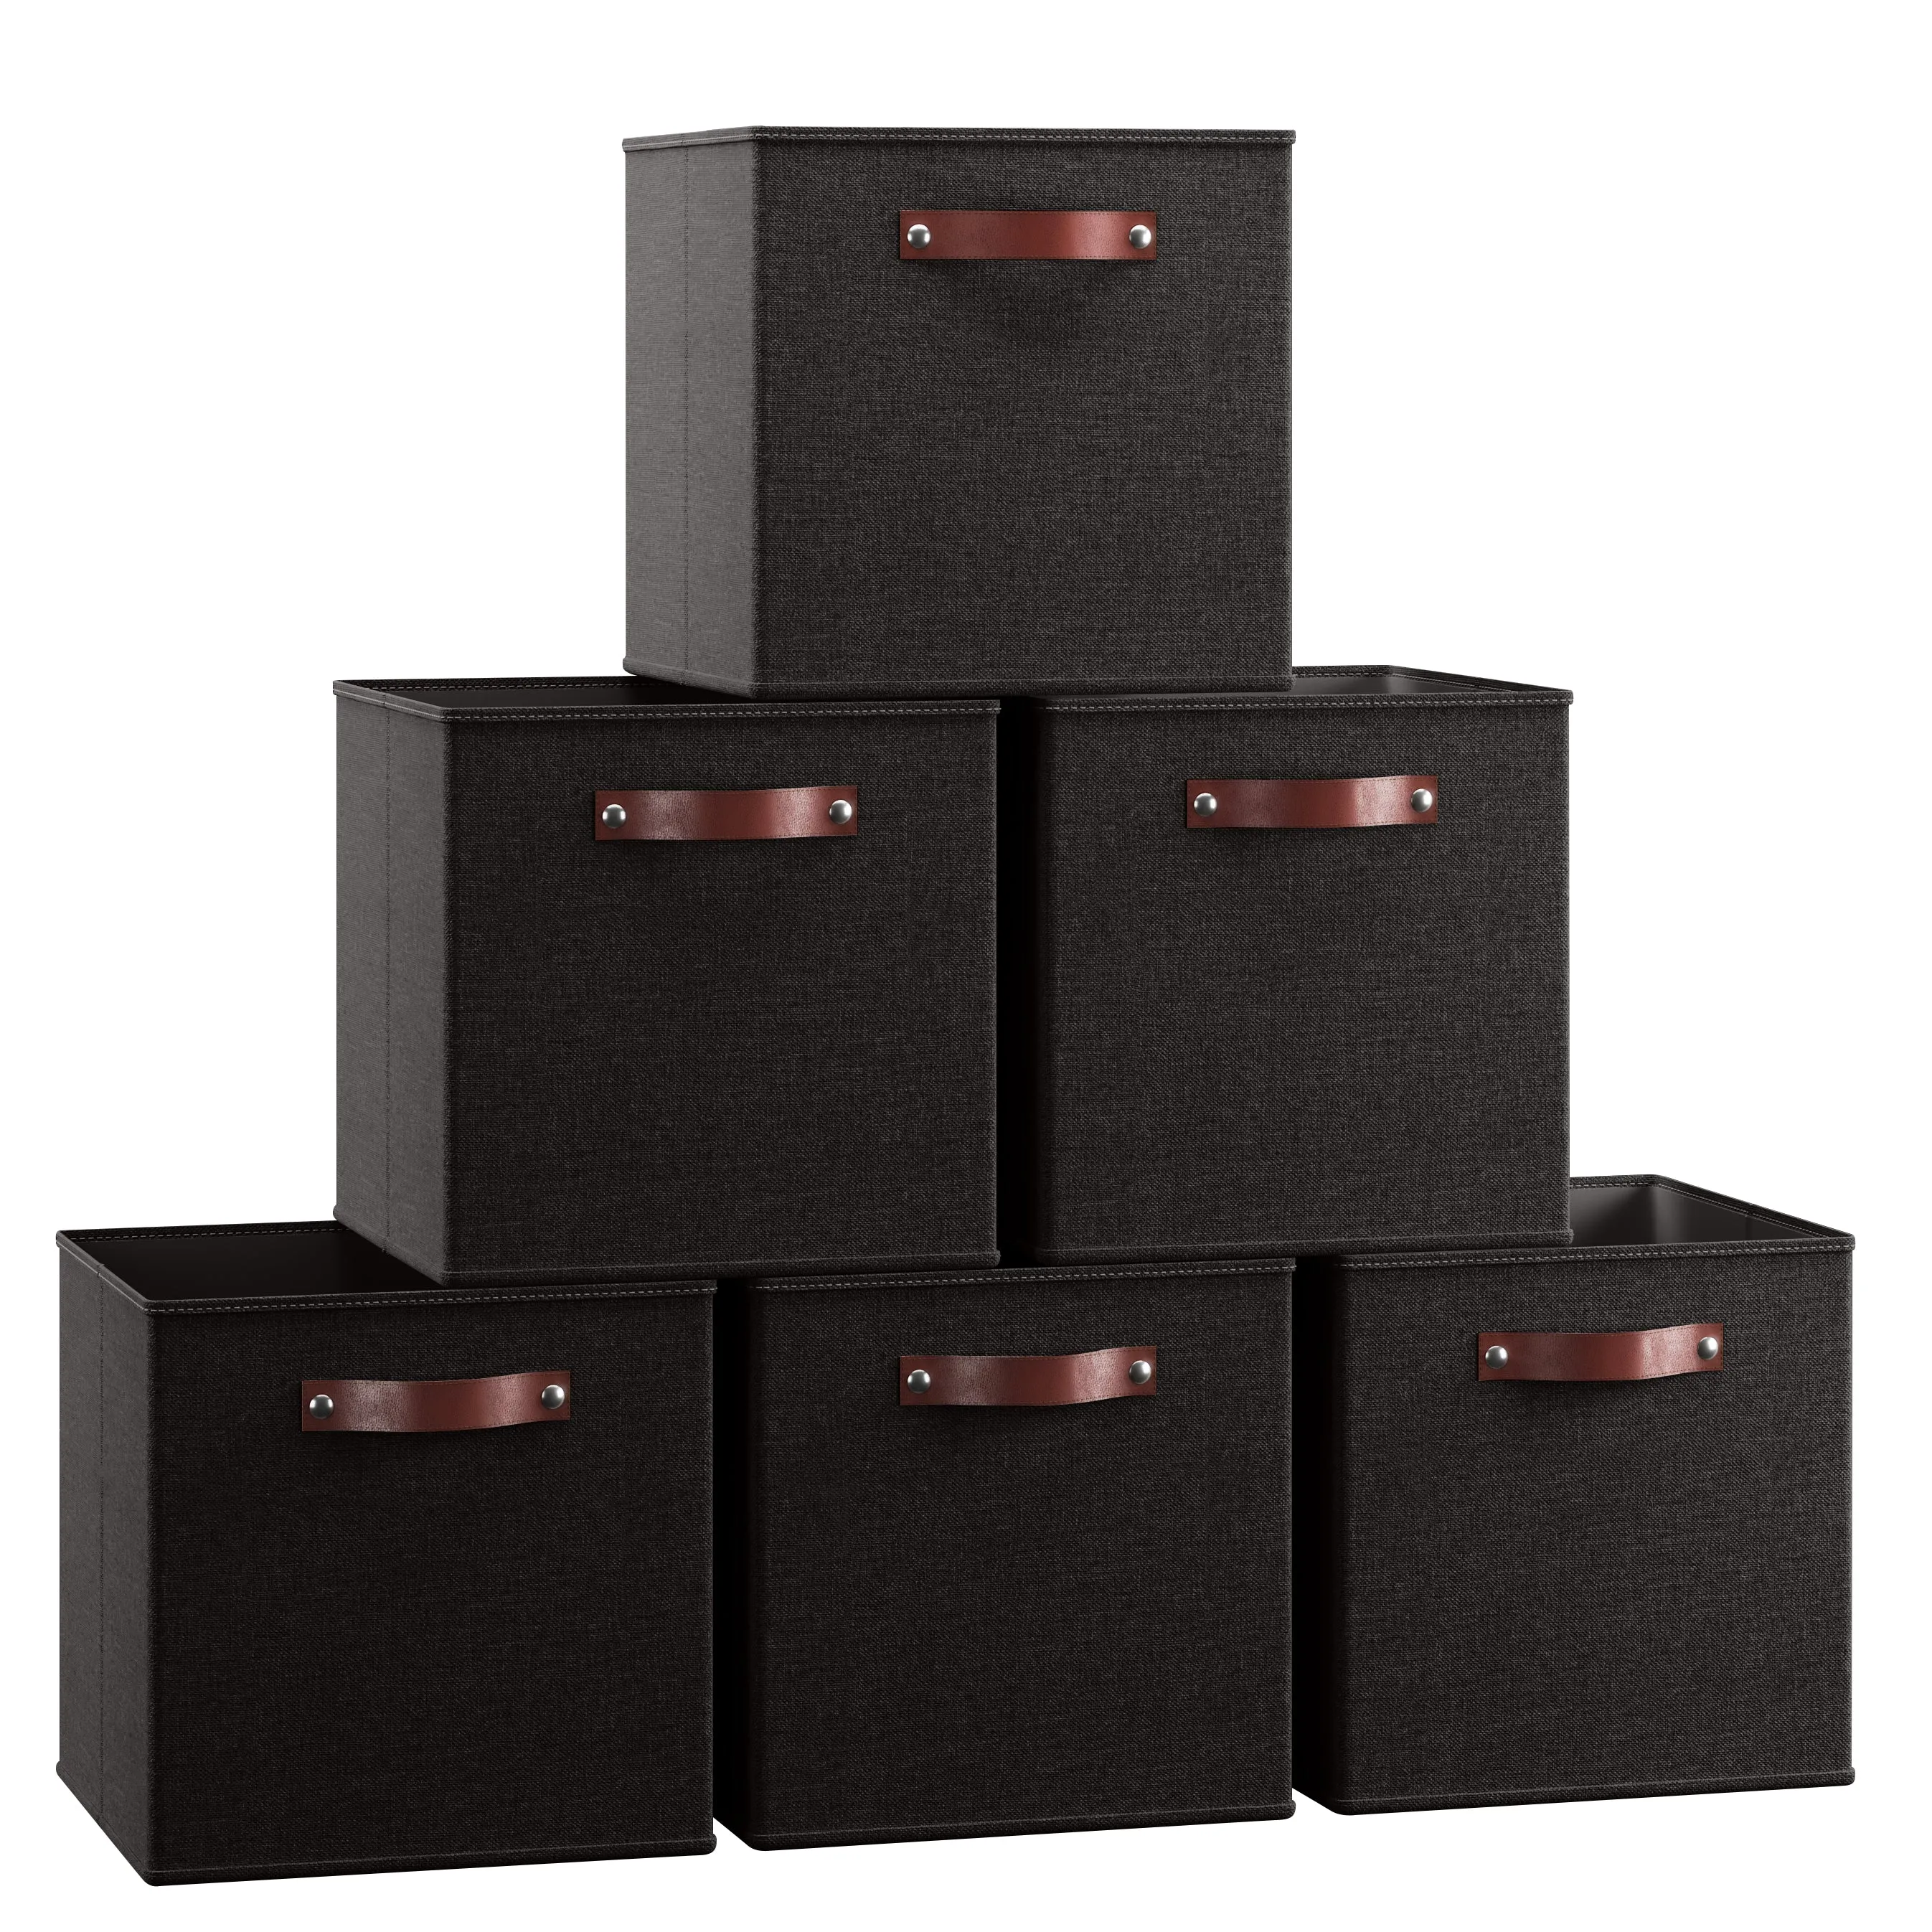 Foldable Linen Storage Cube Bin with Leather Handles - Set of 6